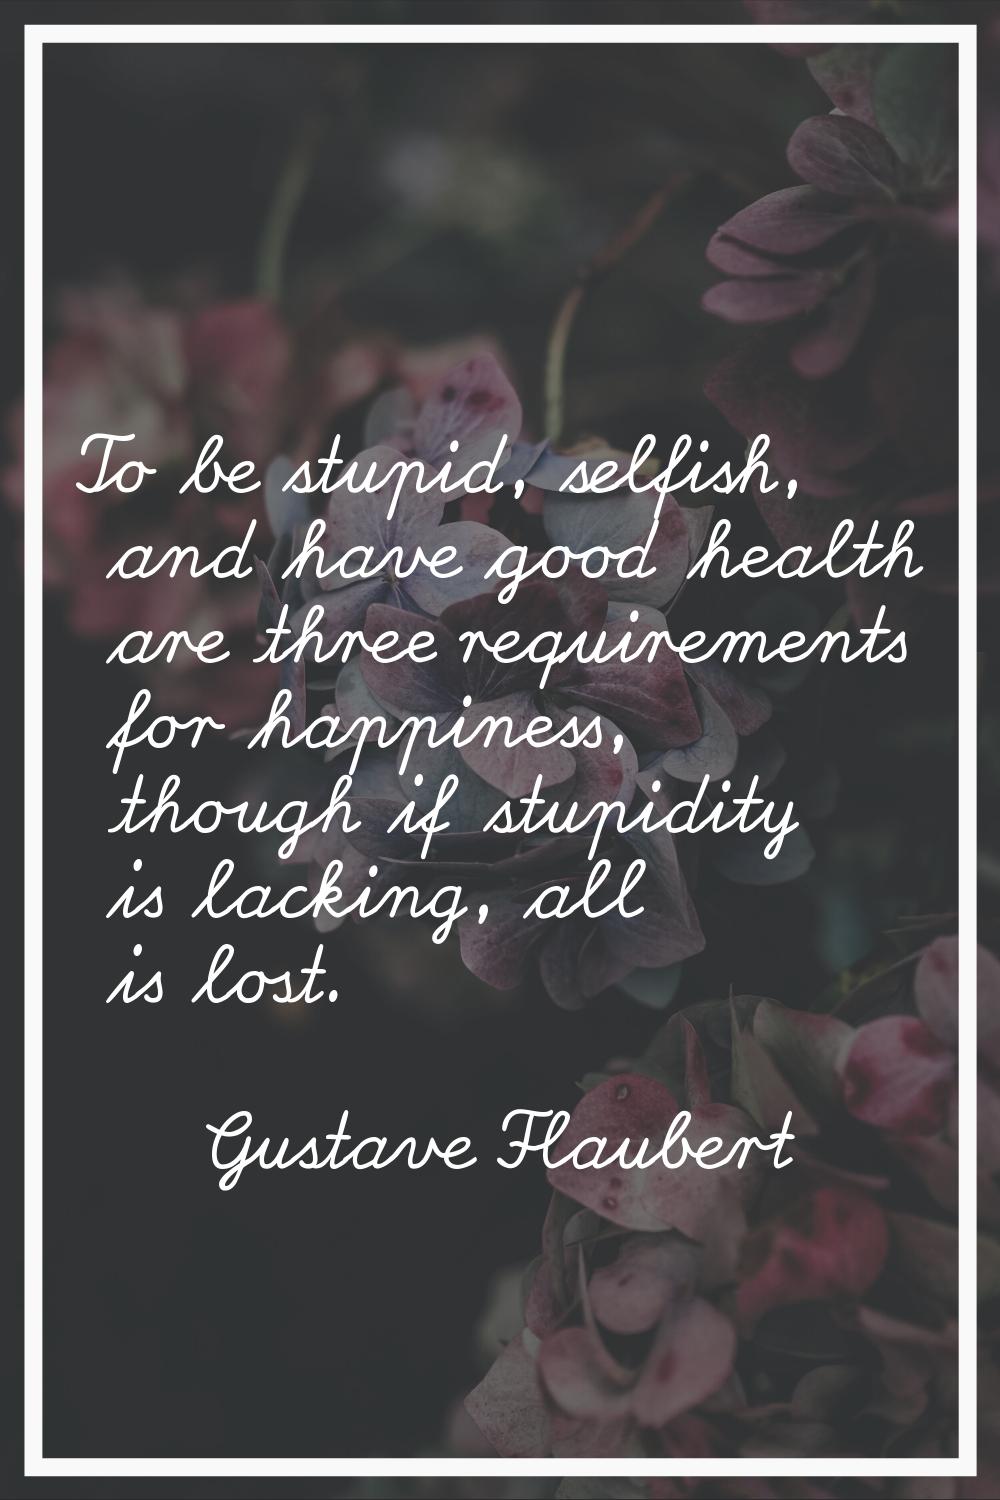 To be stupid, selfish, and have good health are three requirements for happiness, though if stupidi